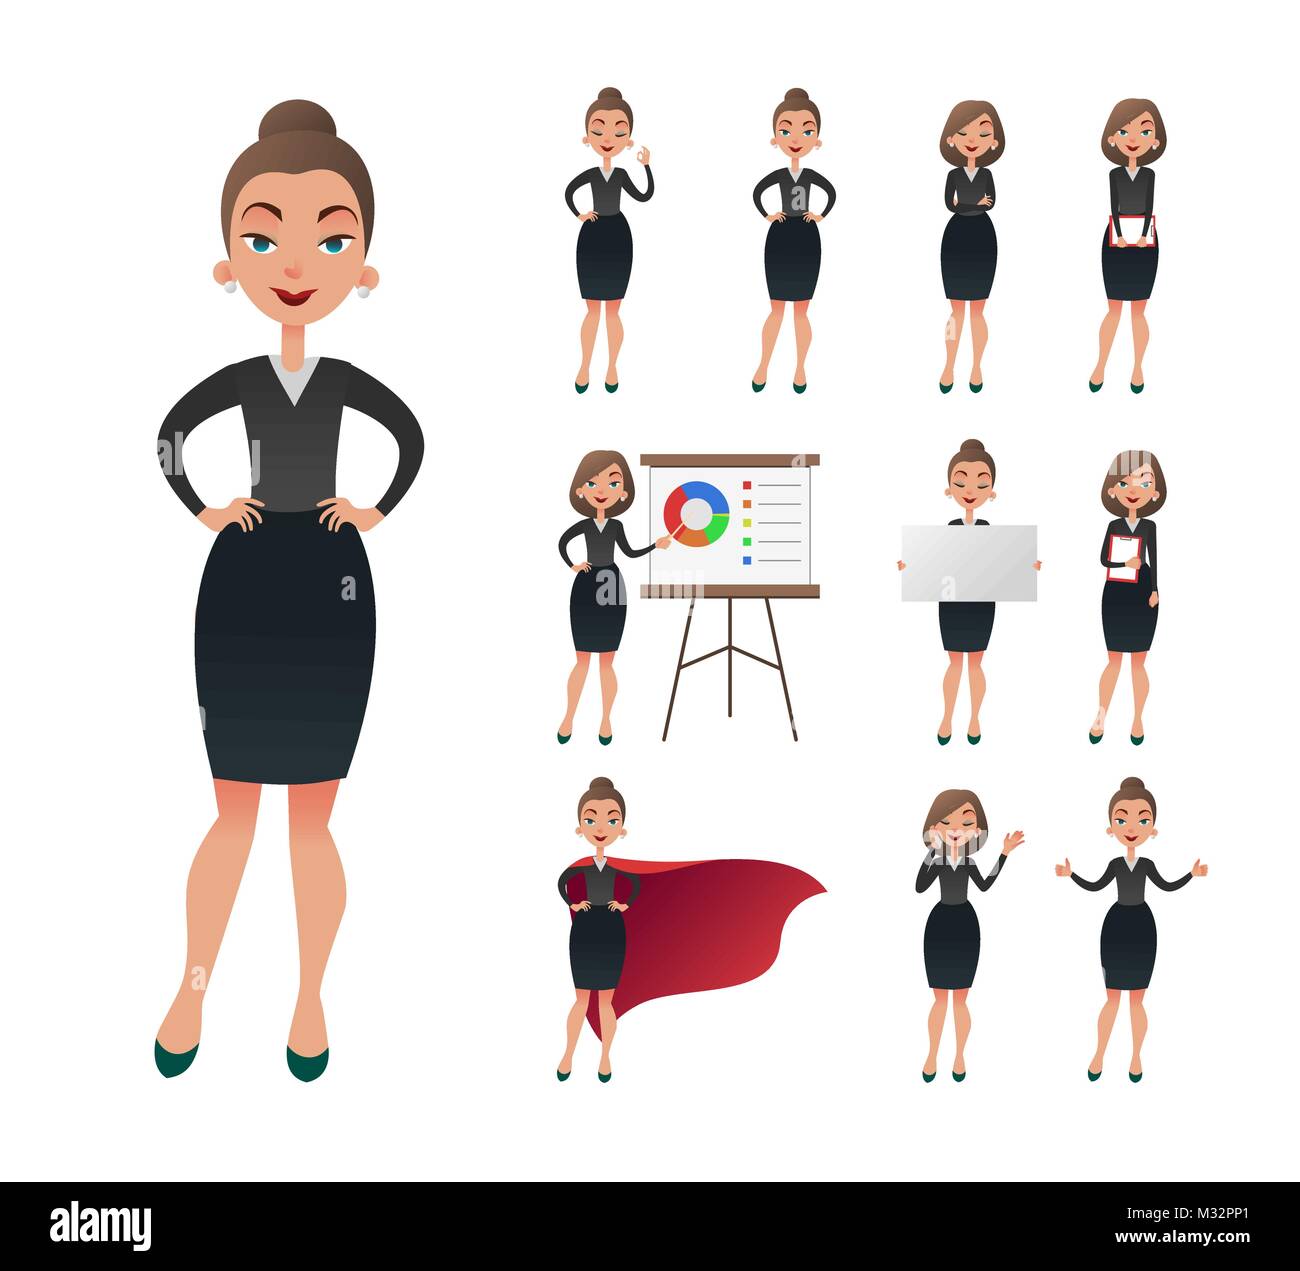 Pretty businesswoman working character set. Sucessful entrepreneur lady in office work situations. Confident young manager in the workplace. Stock Vector